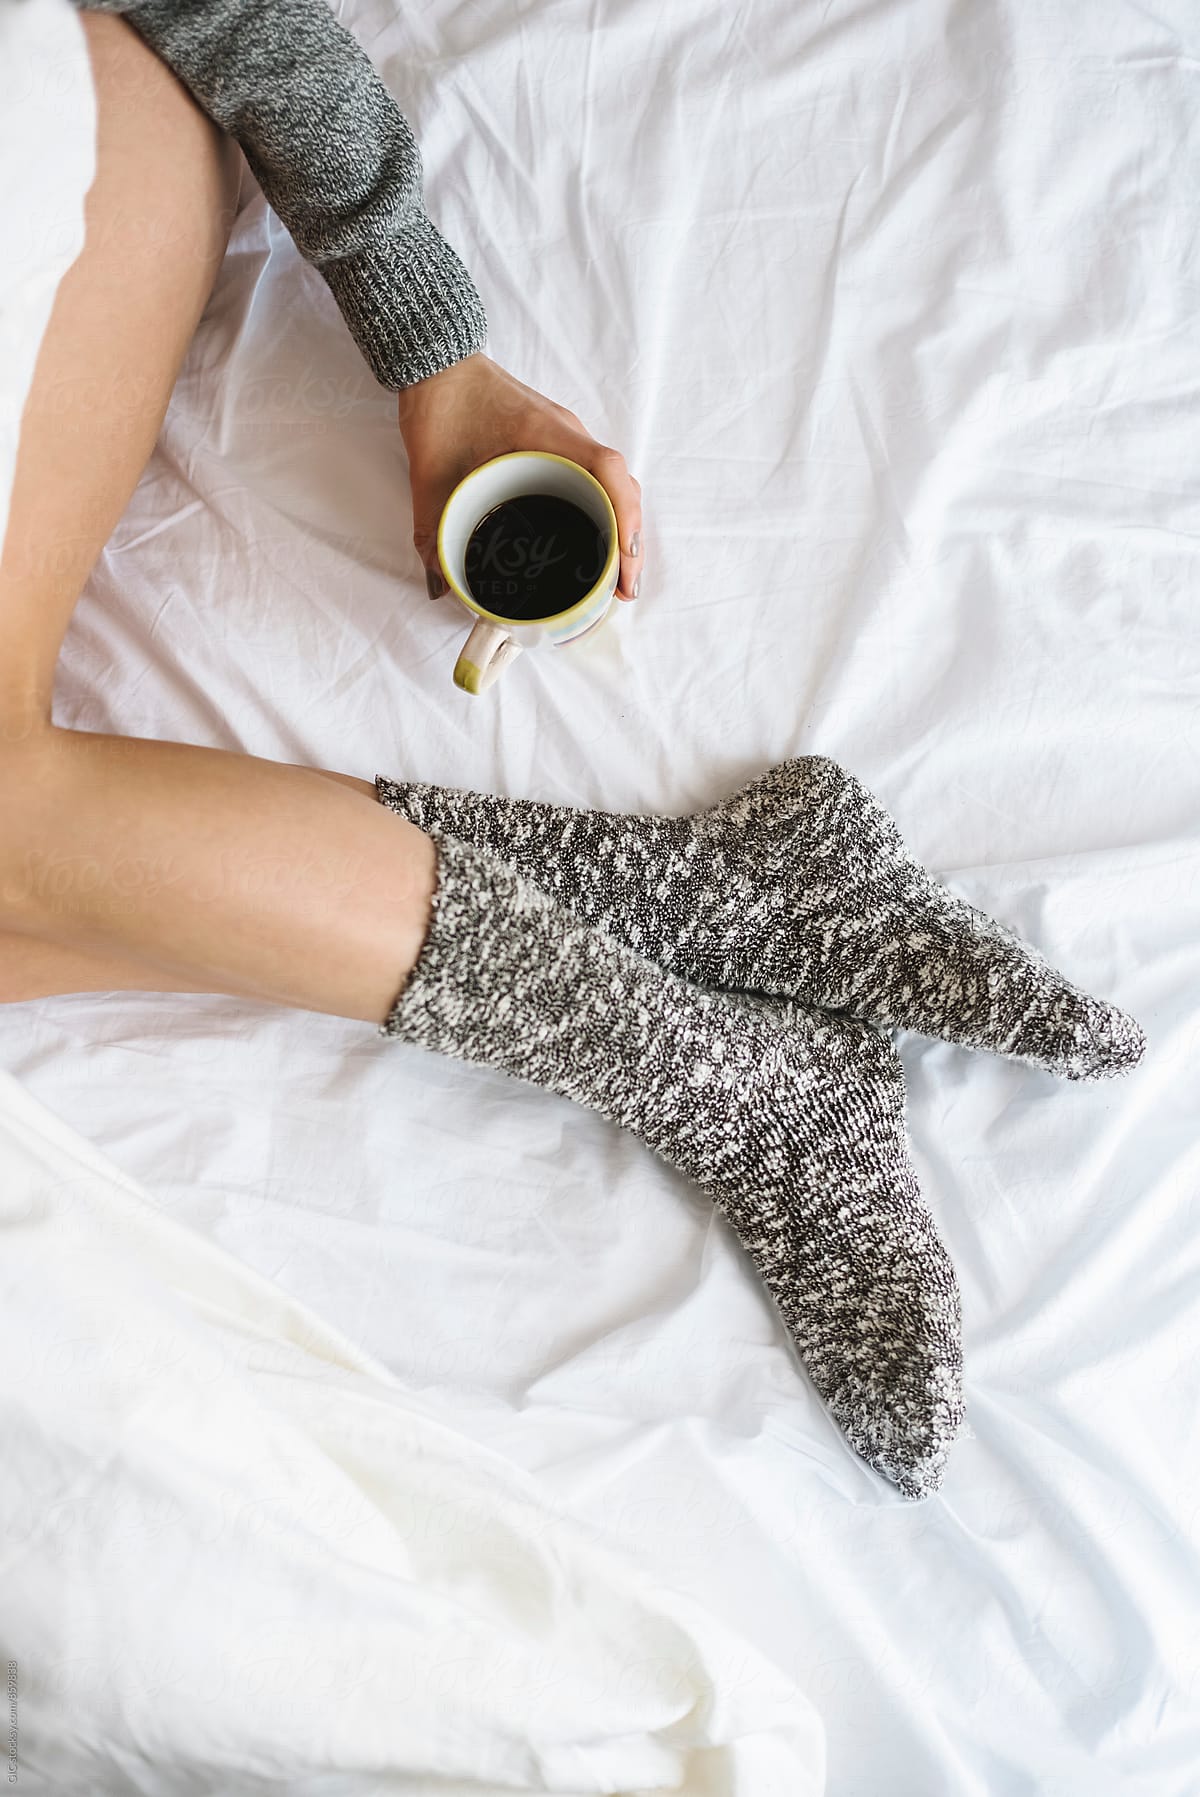 Woman holding a coffee mug in the bed